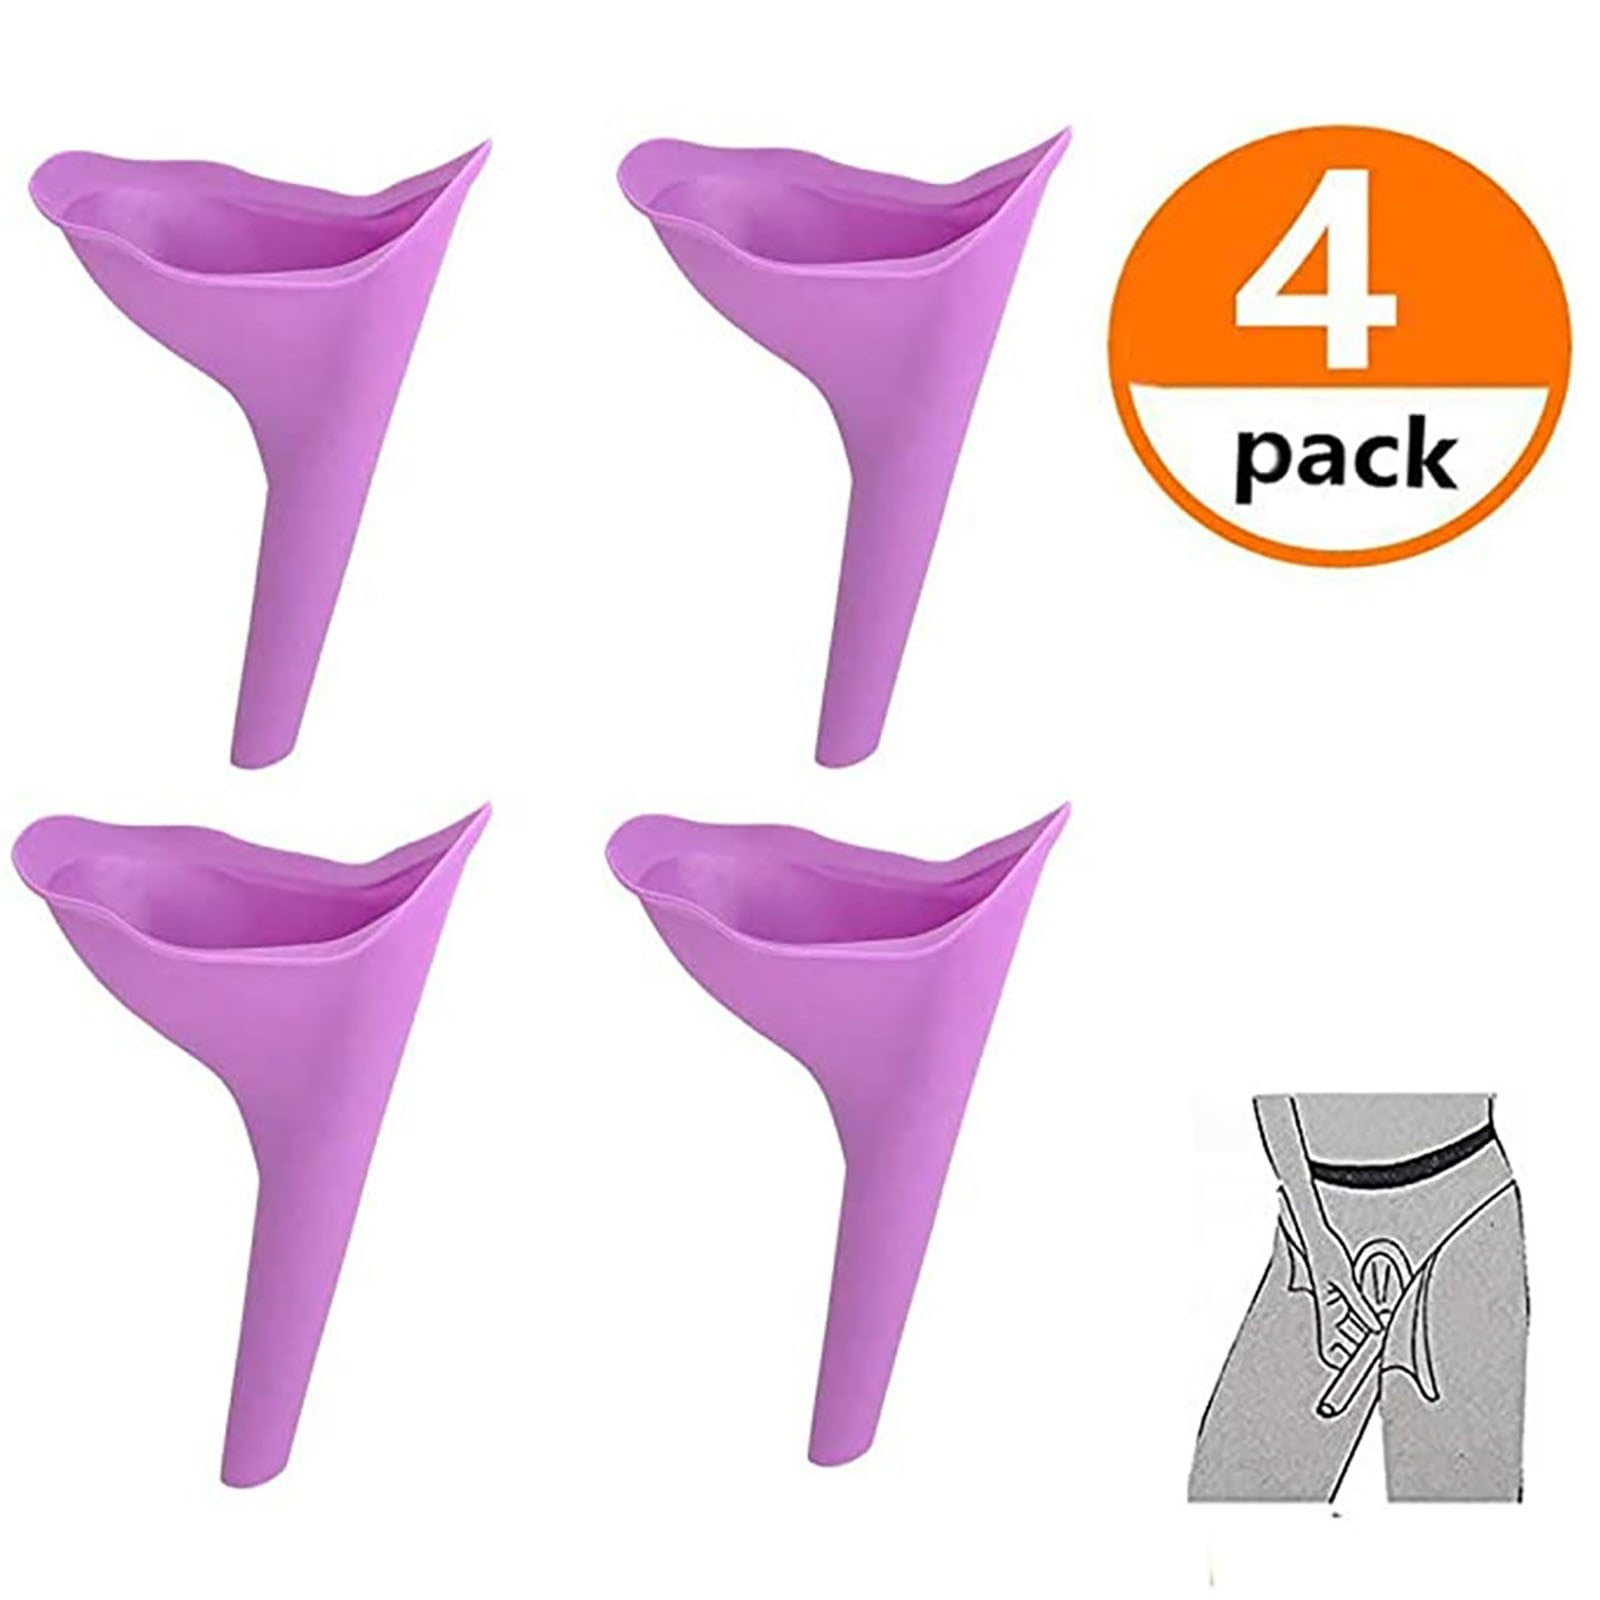 Female Ladies Urinal Device Festival Travel Camping Toilet Portable Womans Urinating Device Funnel No Need to Use Unsanitary Toilets Again 